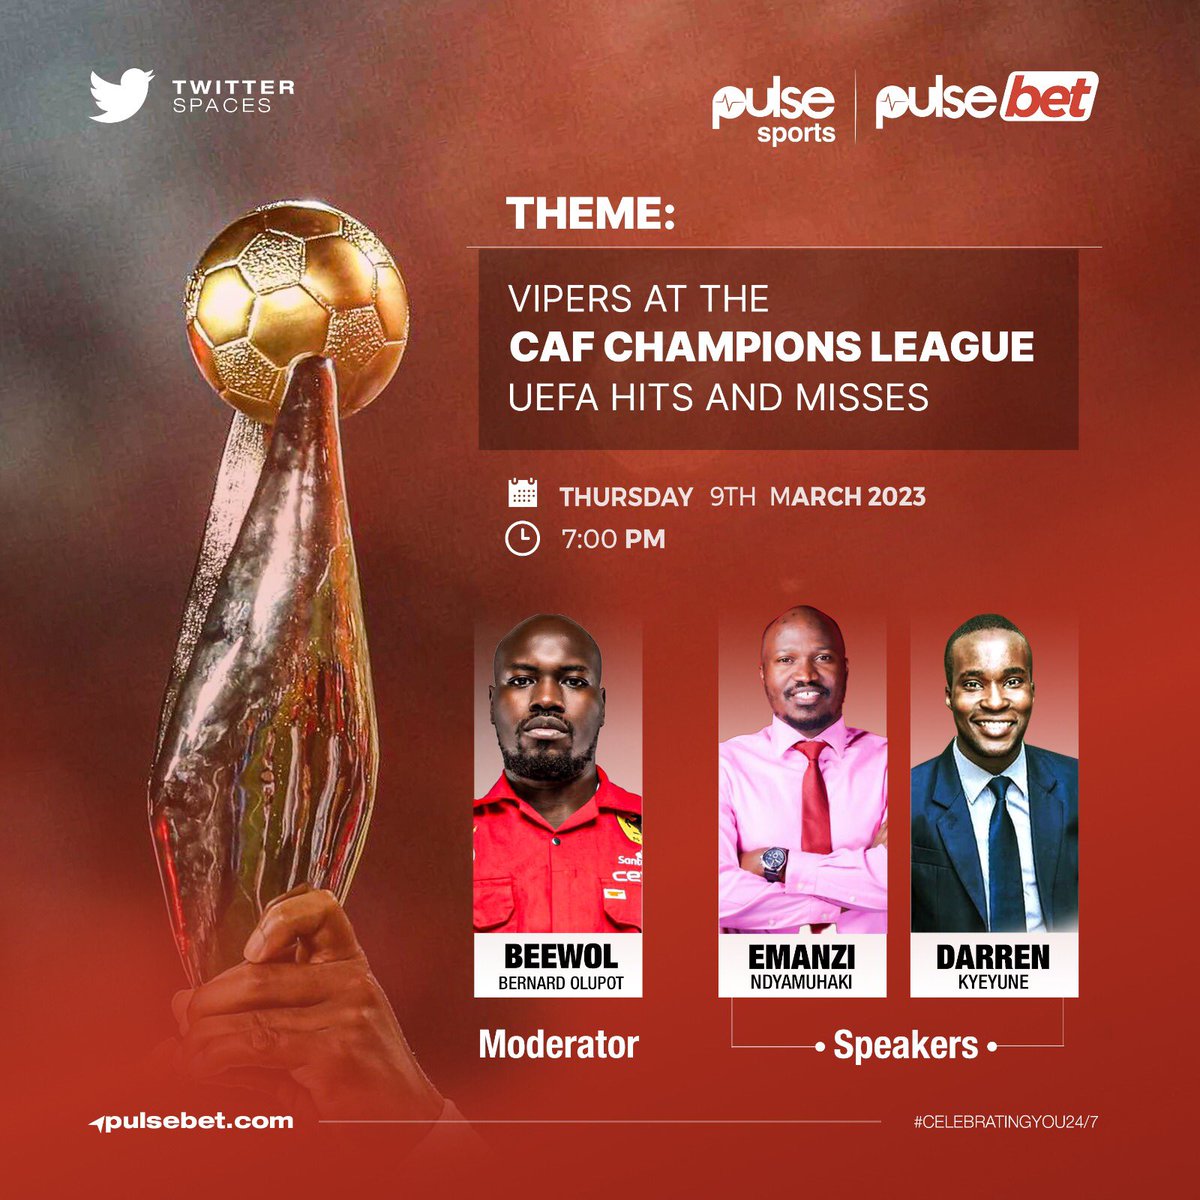 Twitter space alert 🚨 
Tomorrow @pulsebetuganda , we shall be talking “Vipers at the #CAFChampionsLeague , the UEFA hits and misses” don’t miss out on  @Emanzi20 & @AllanDarren on the space that will be moderated by @beewol 
#PulseBetUg